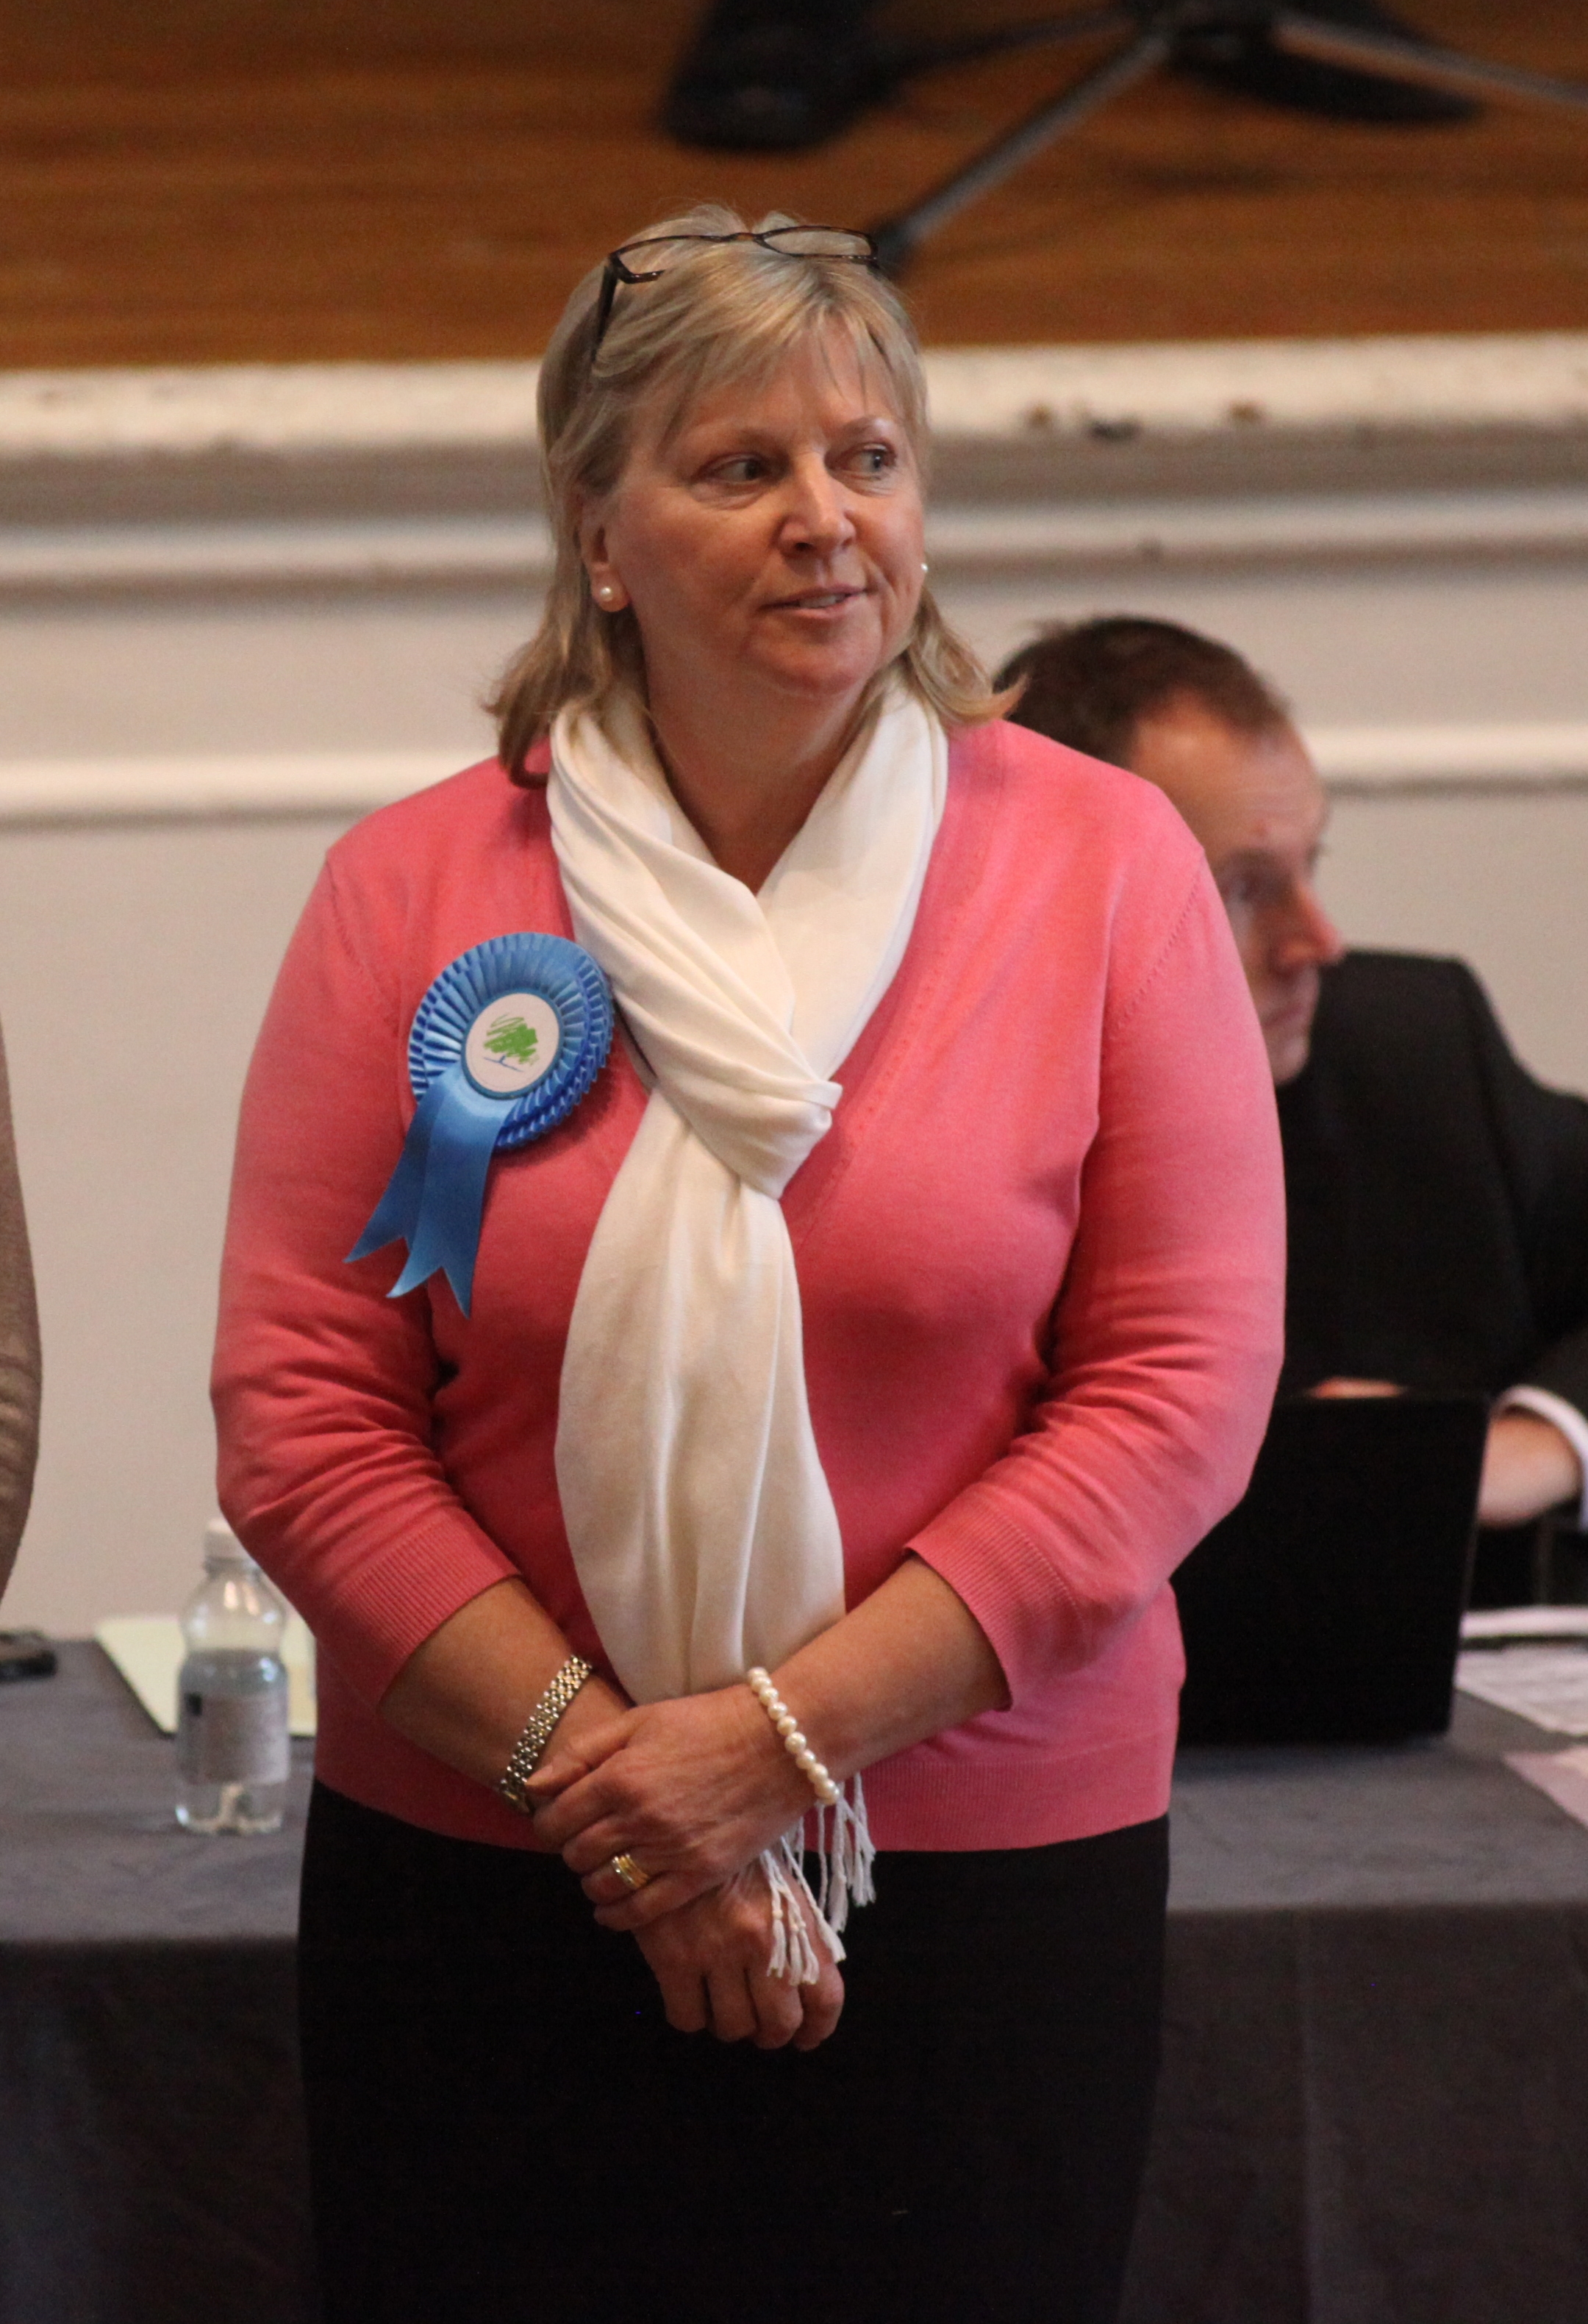 23 May 2014 - Winchester Election results - Caroline Horrill Conservative wins Sparsholt seat.